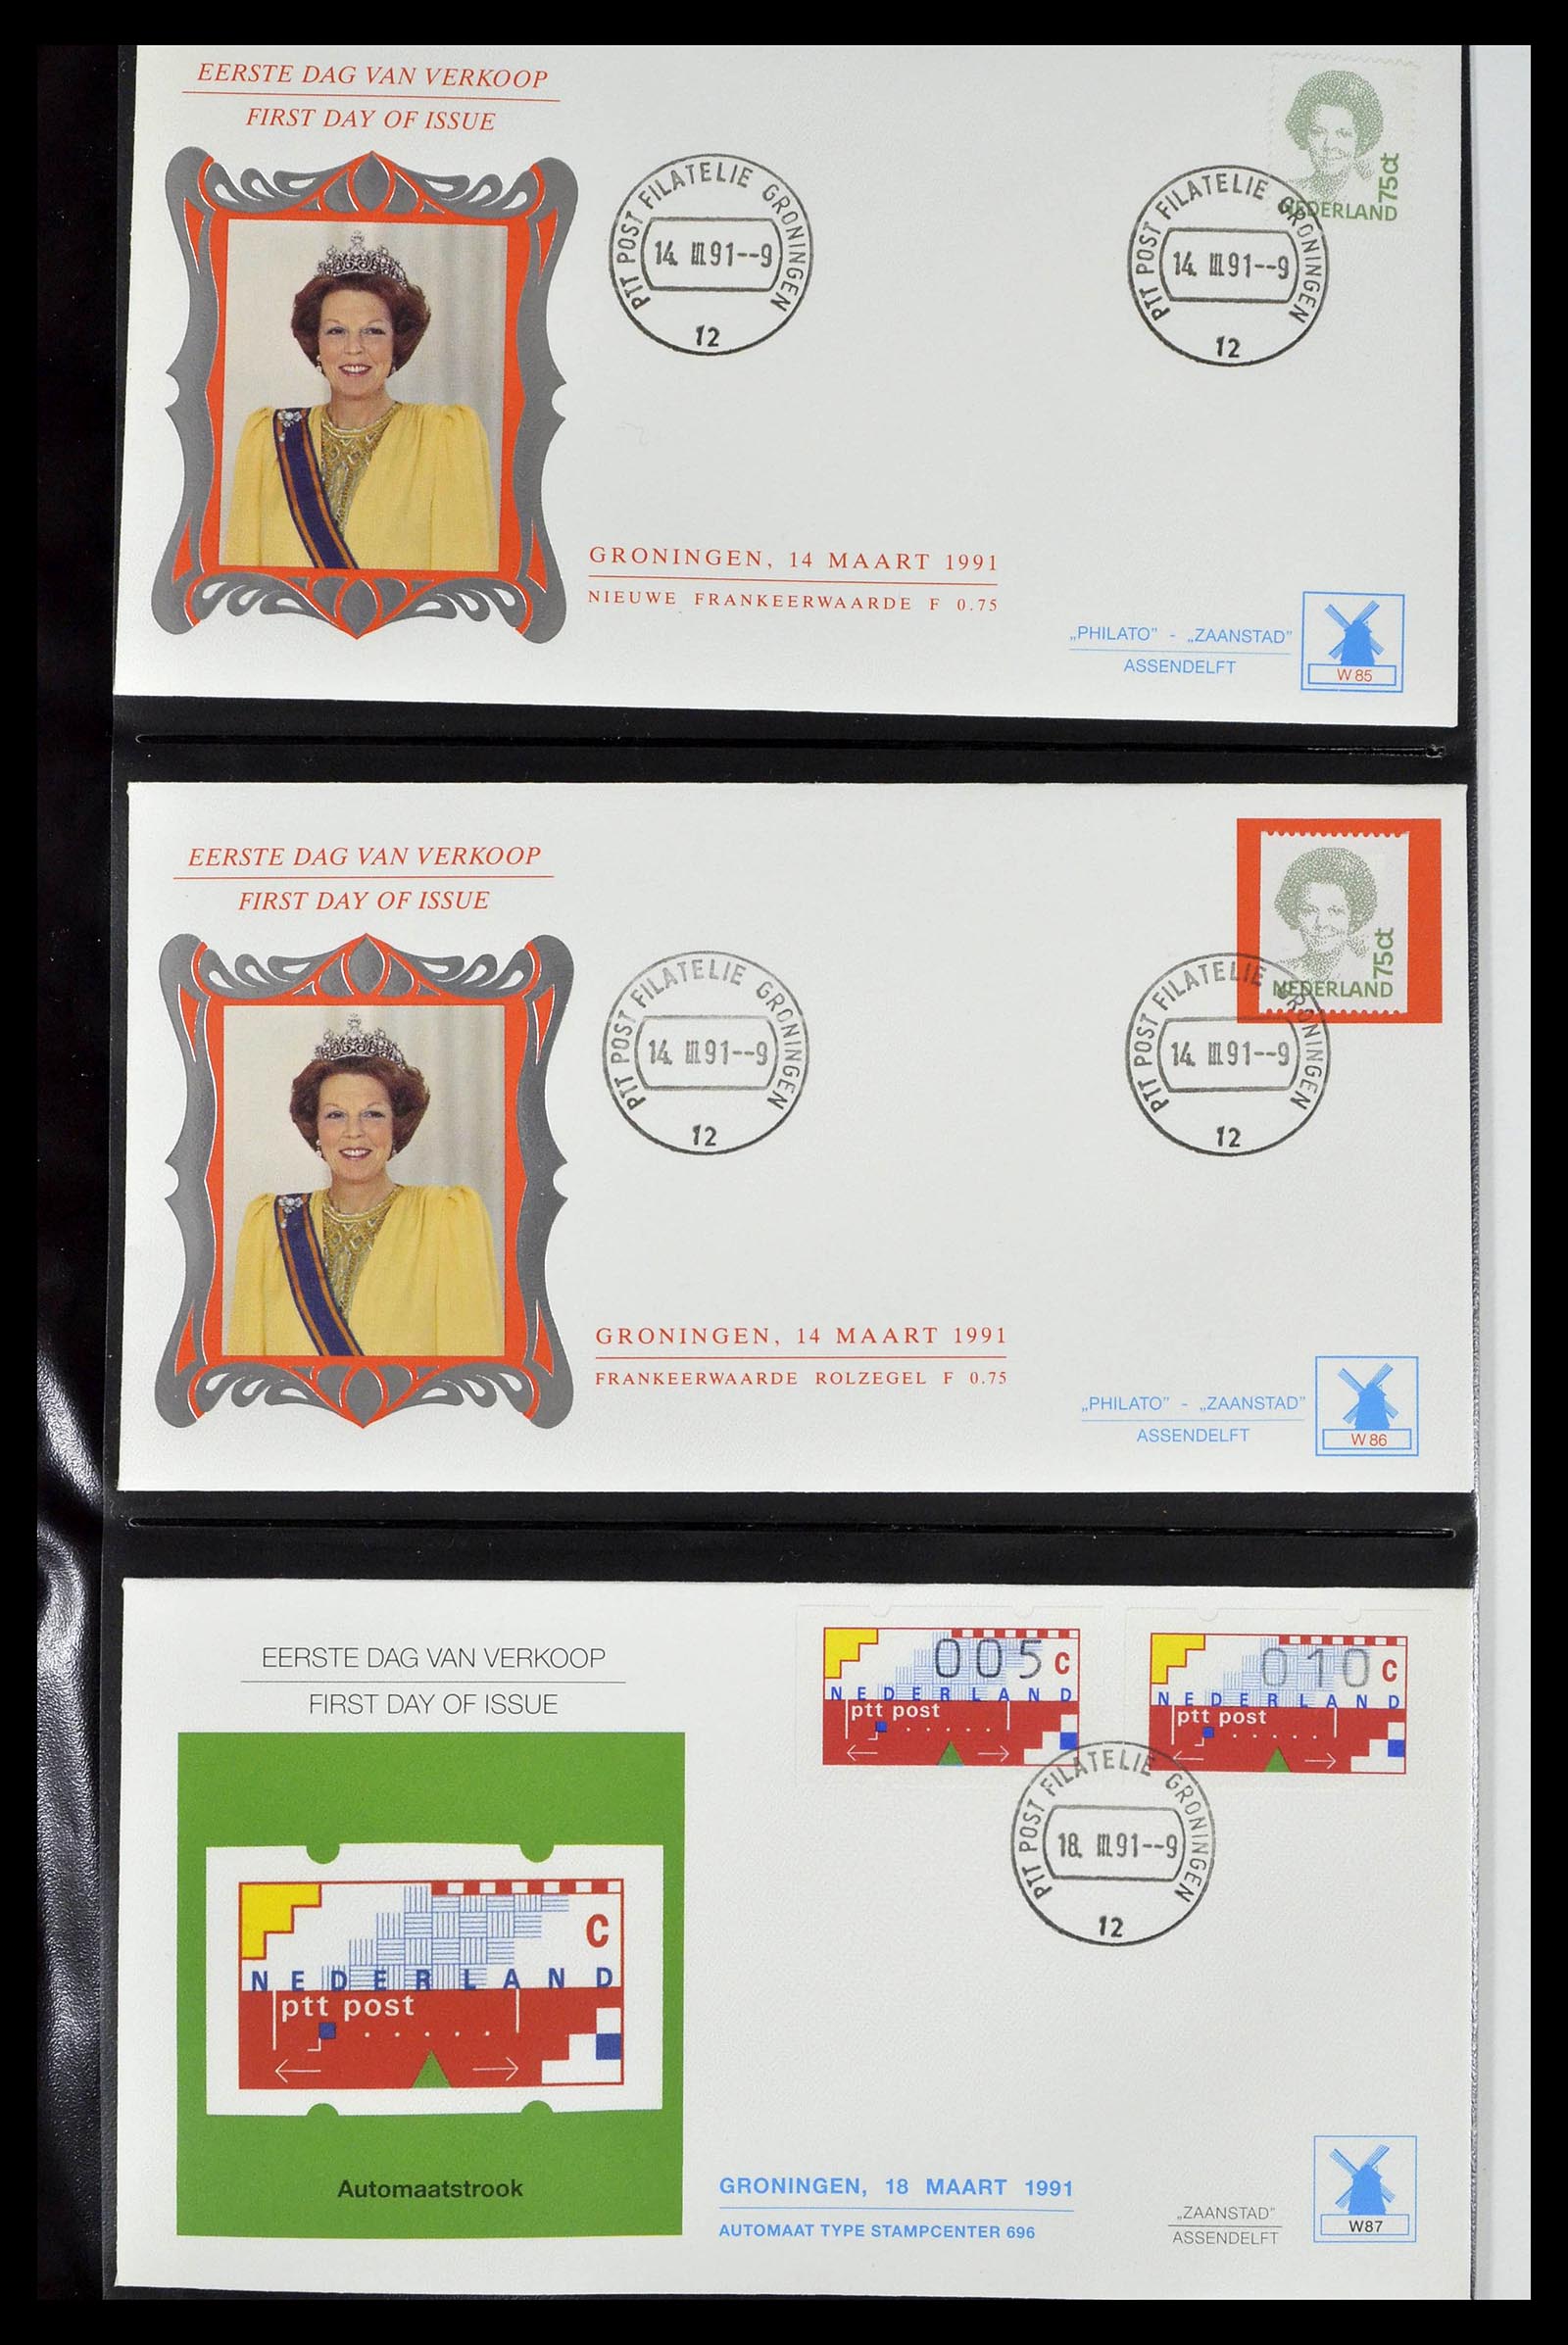 38559 0523 - Stamp collection 38559 Netherlands special first day covers.